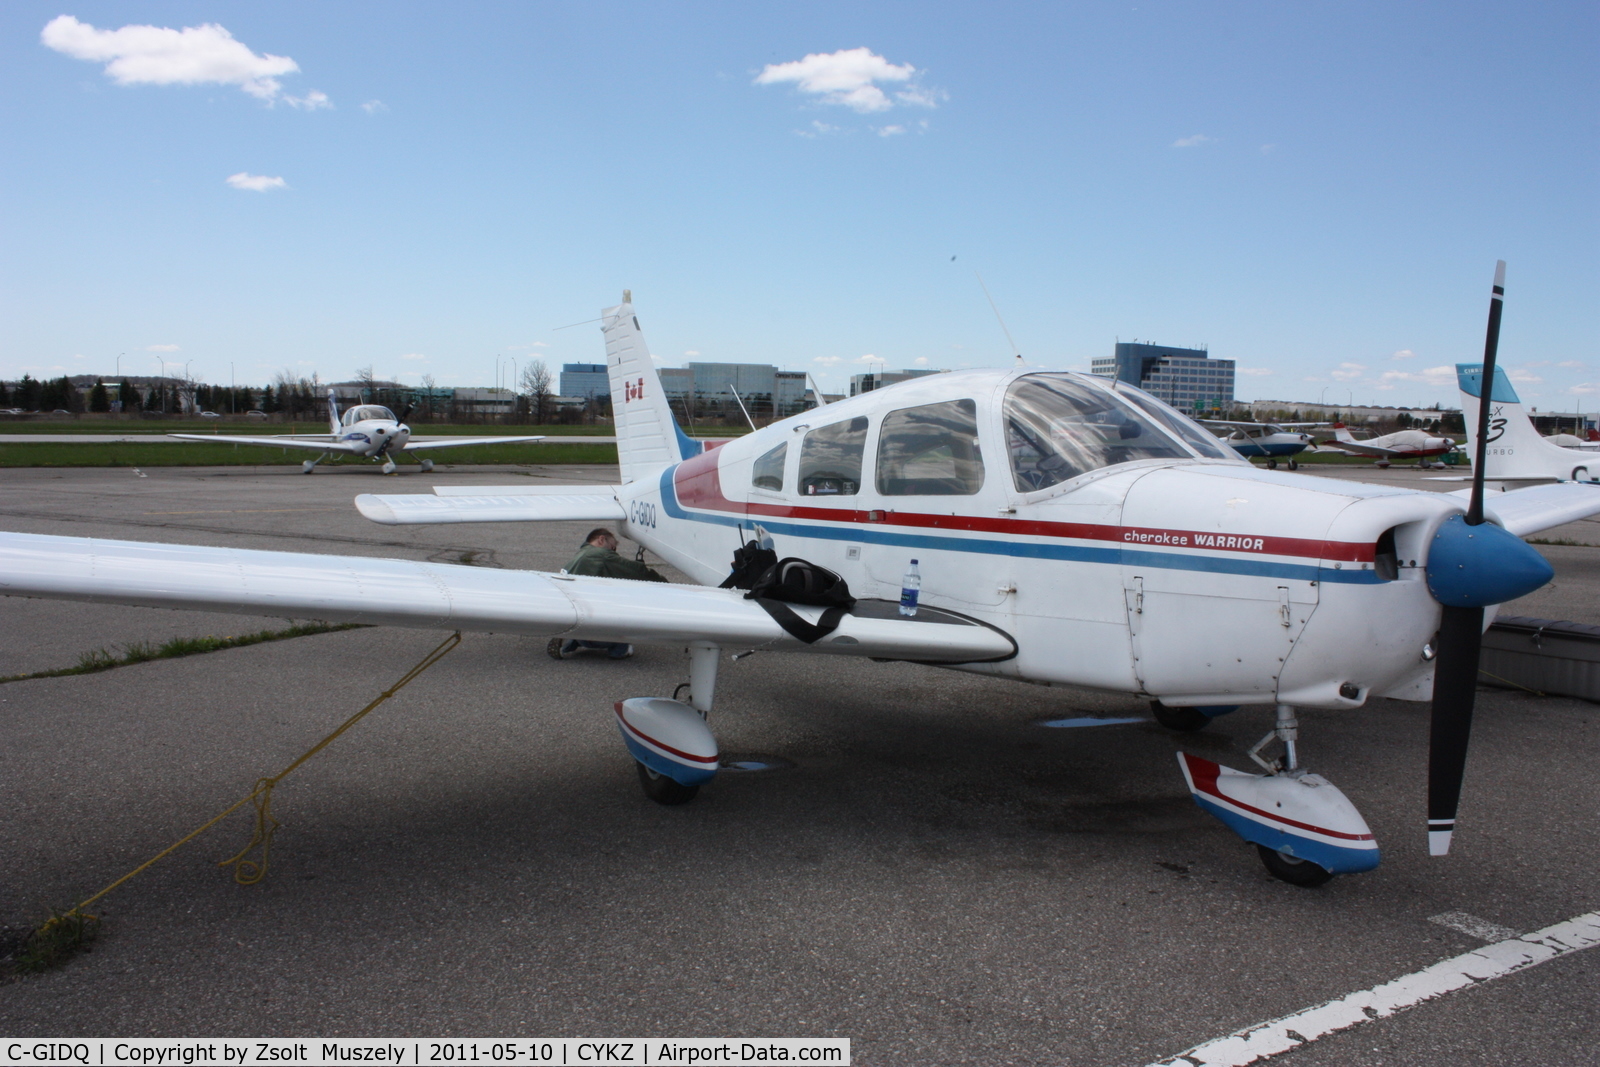 C-GIDQ, 1976 Piper PA-28-151 C/N 287615235, I recently flying this aircraft